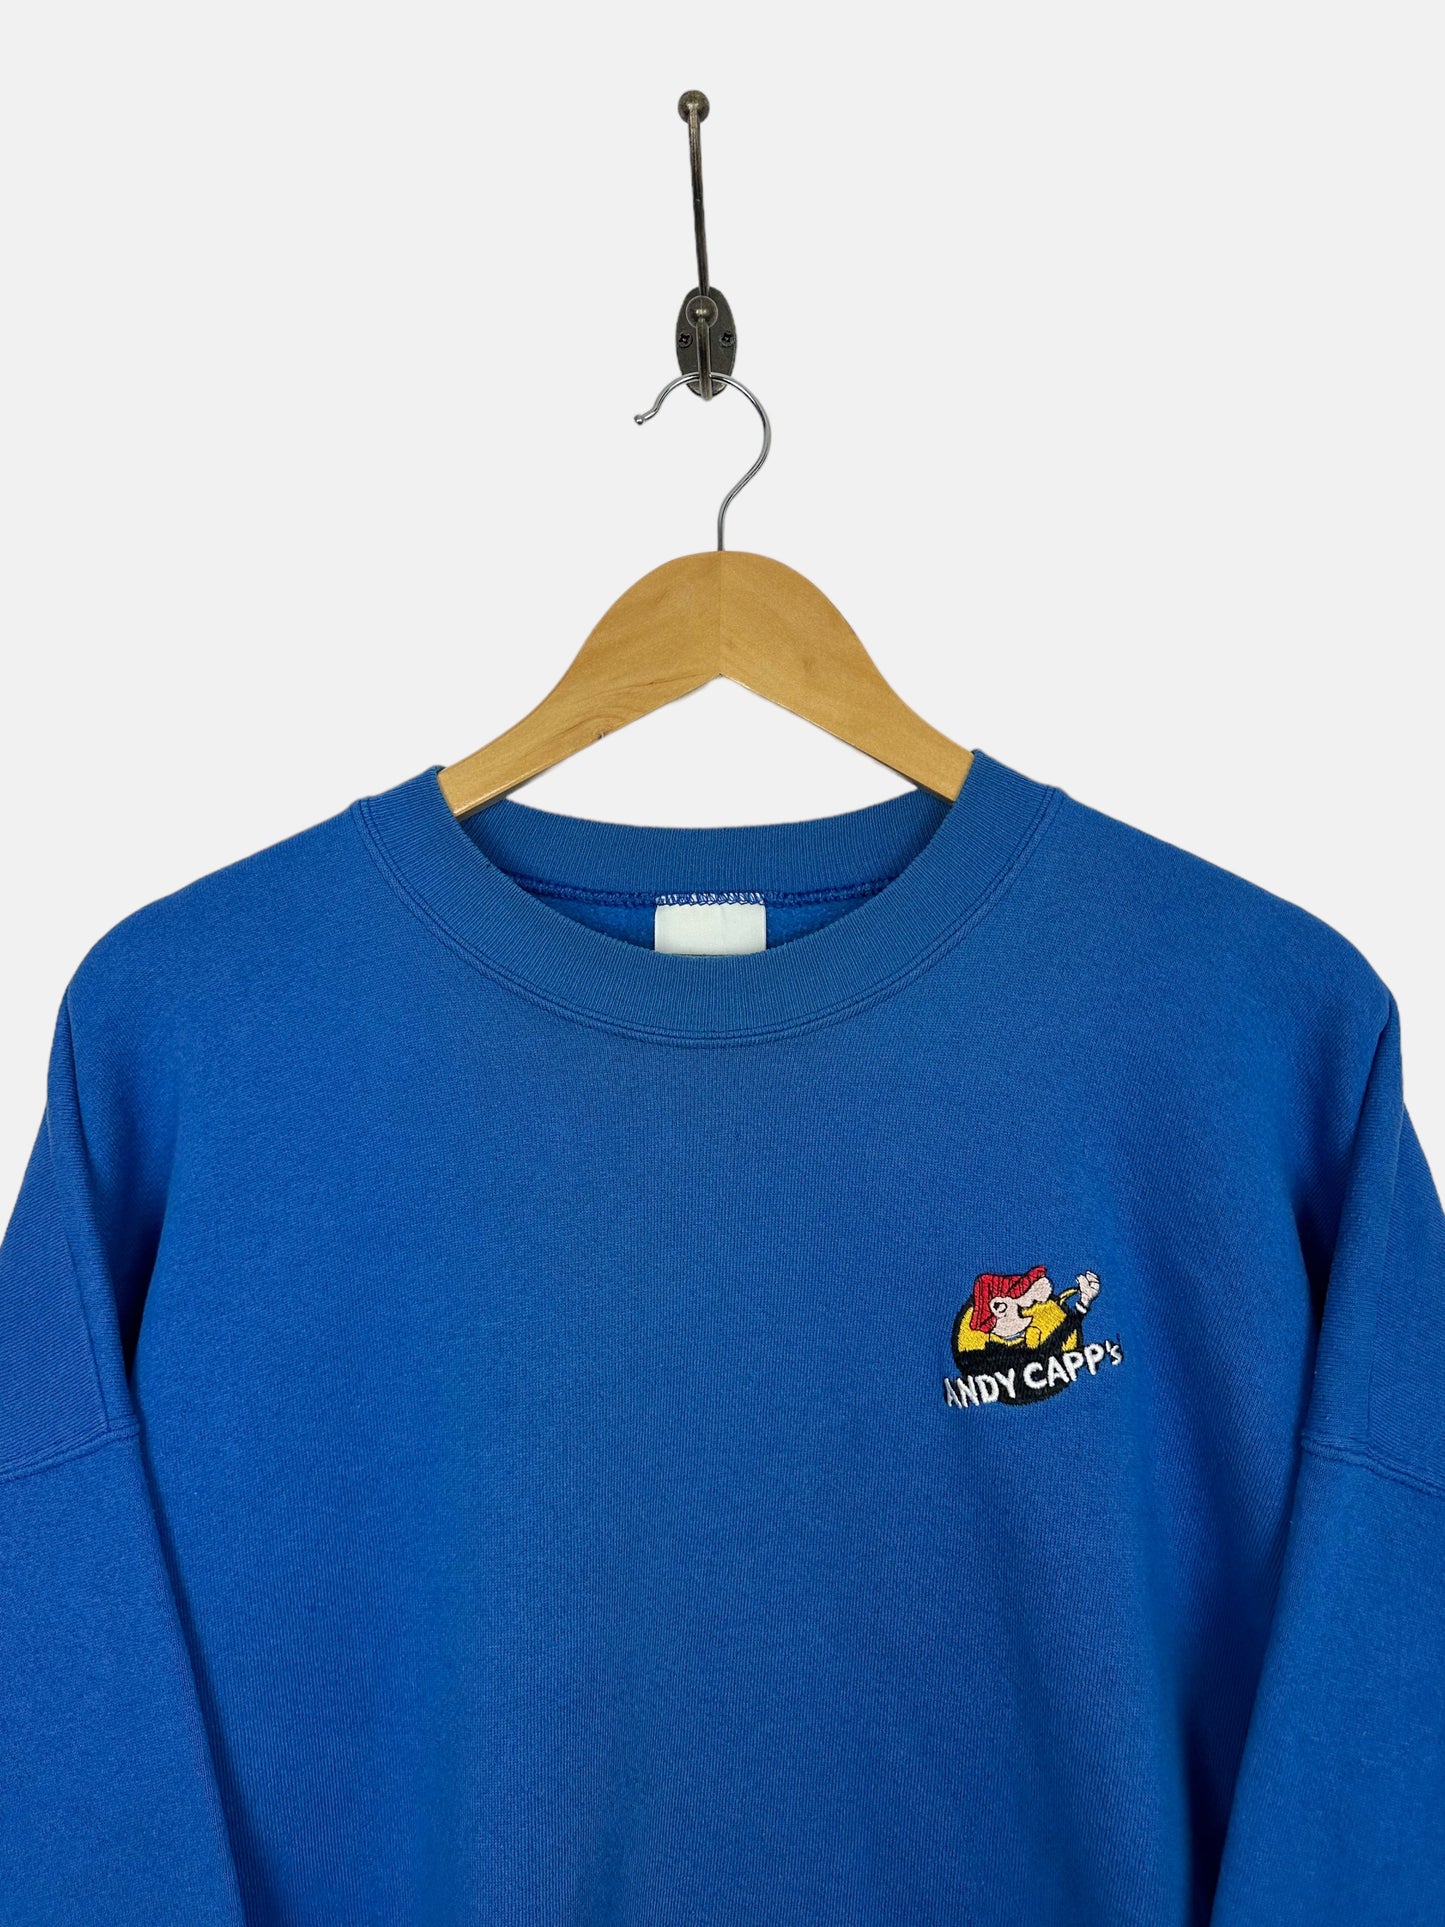 90's Andy Capp's Embroidered Vintage Sweatshirt XL